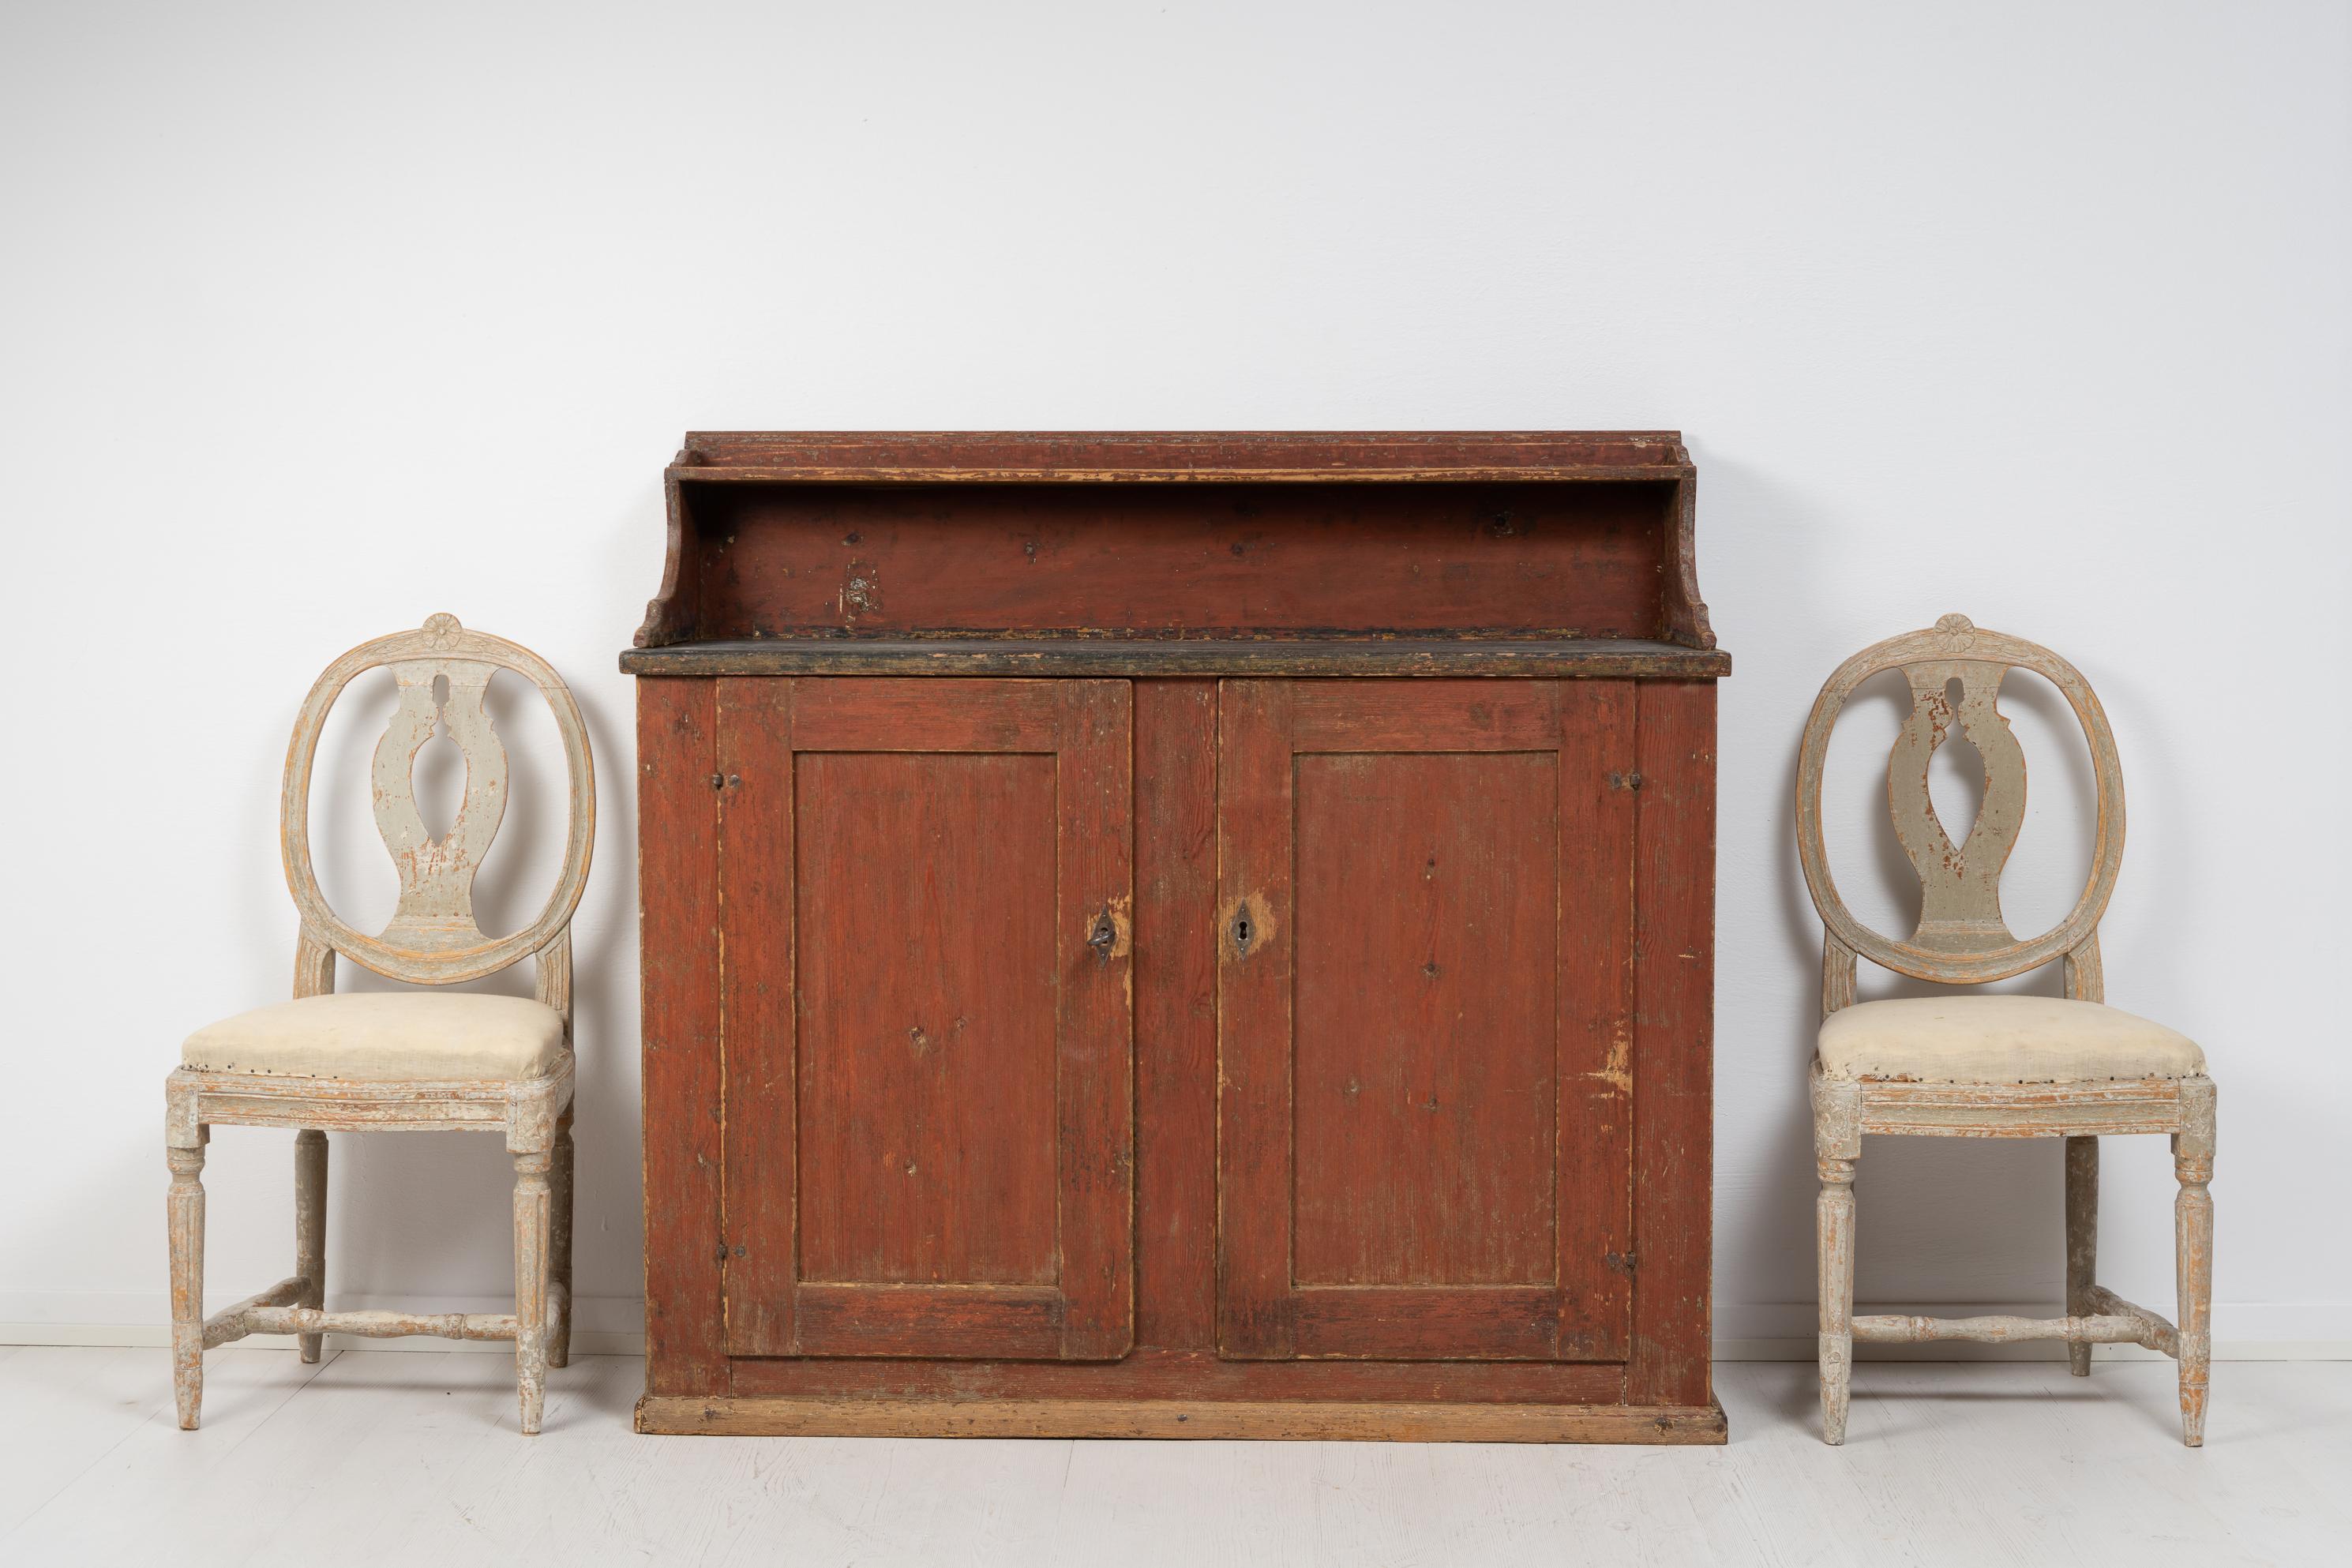 Folk art country sideboard from northern Sweden made during the early 1800s, around 1820 to 1840. The sideboard is painted pine with the original paint and authentic distress of time. The patina is genuine to the sideboard and adds a wealth of